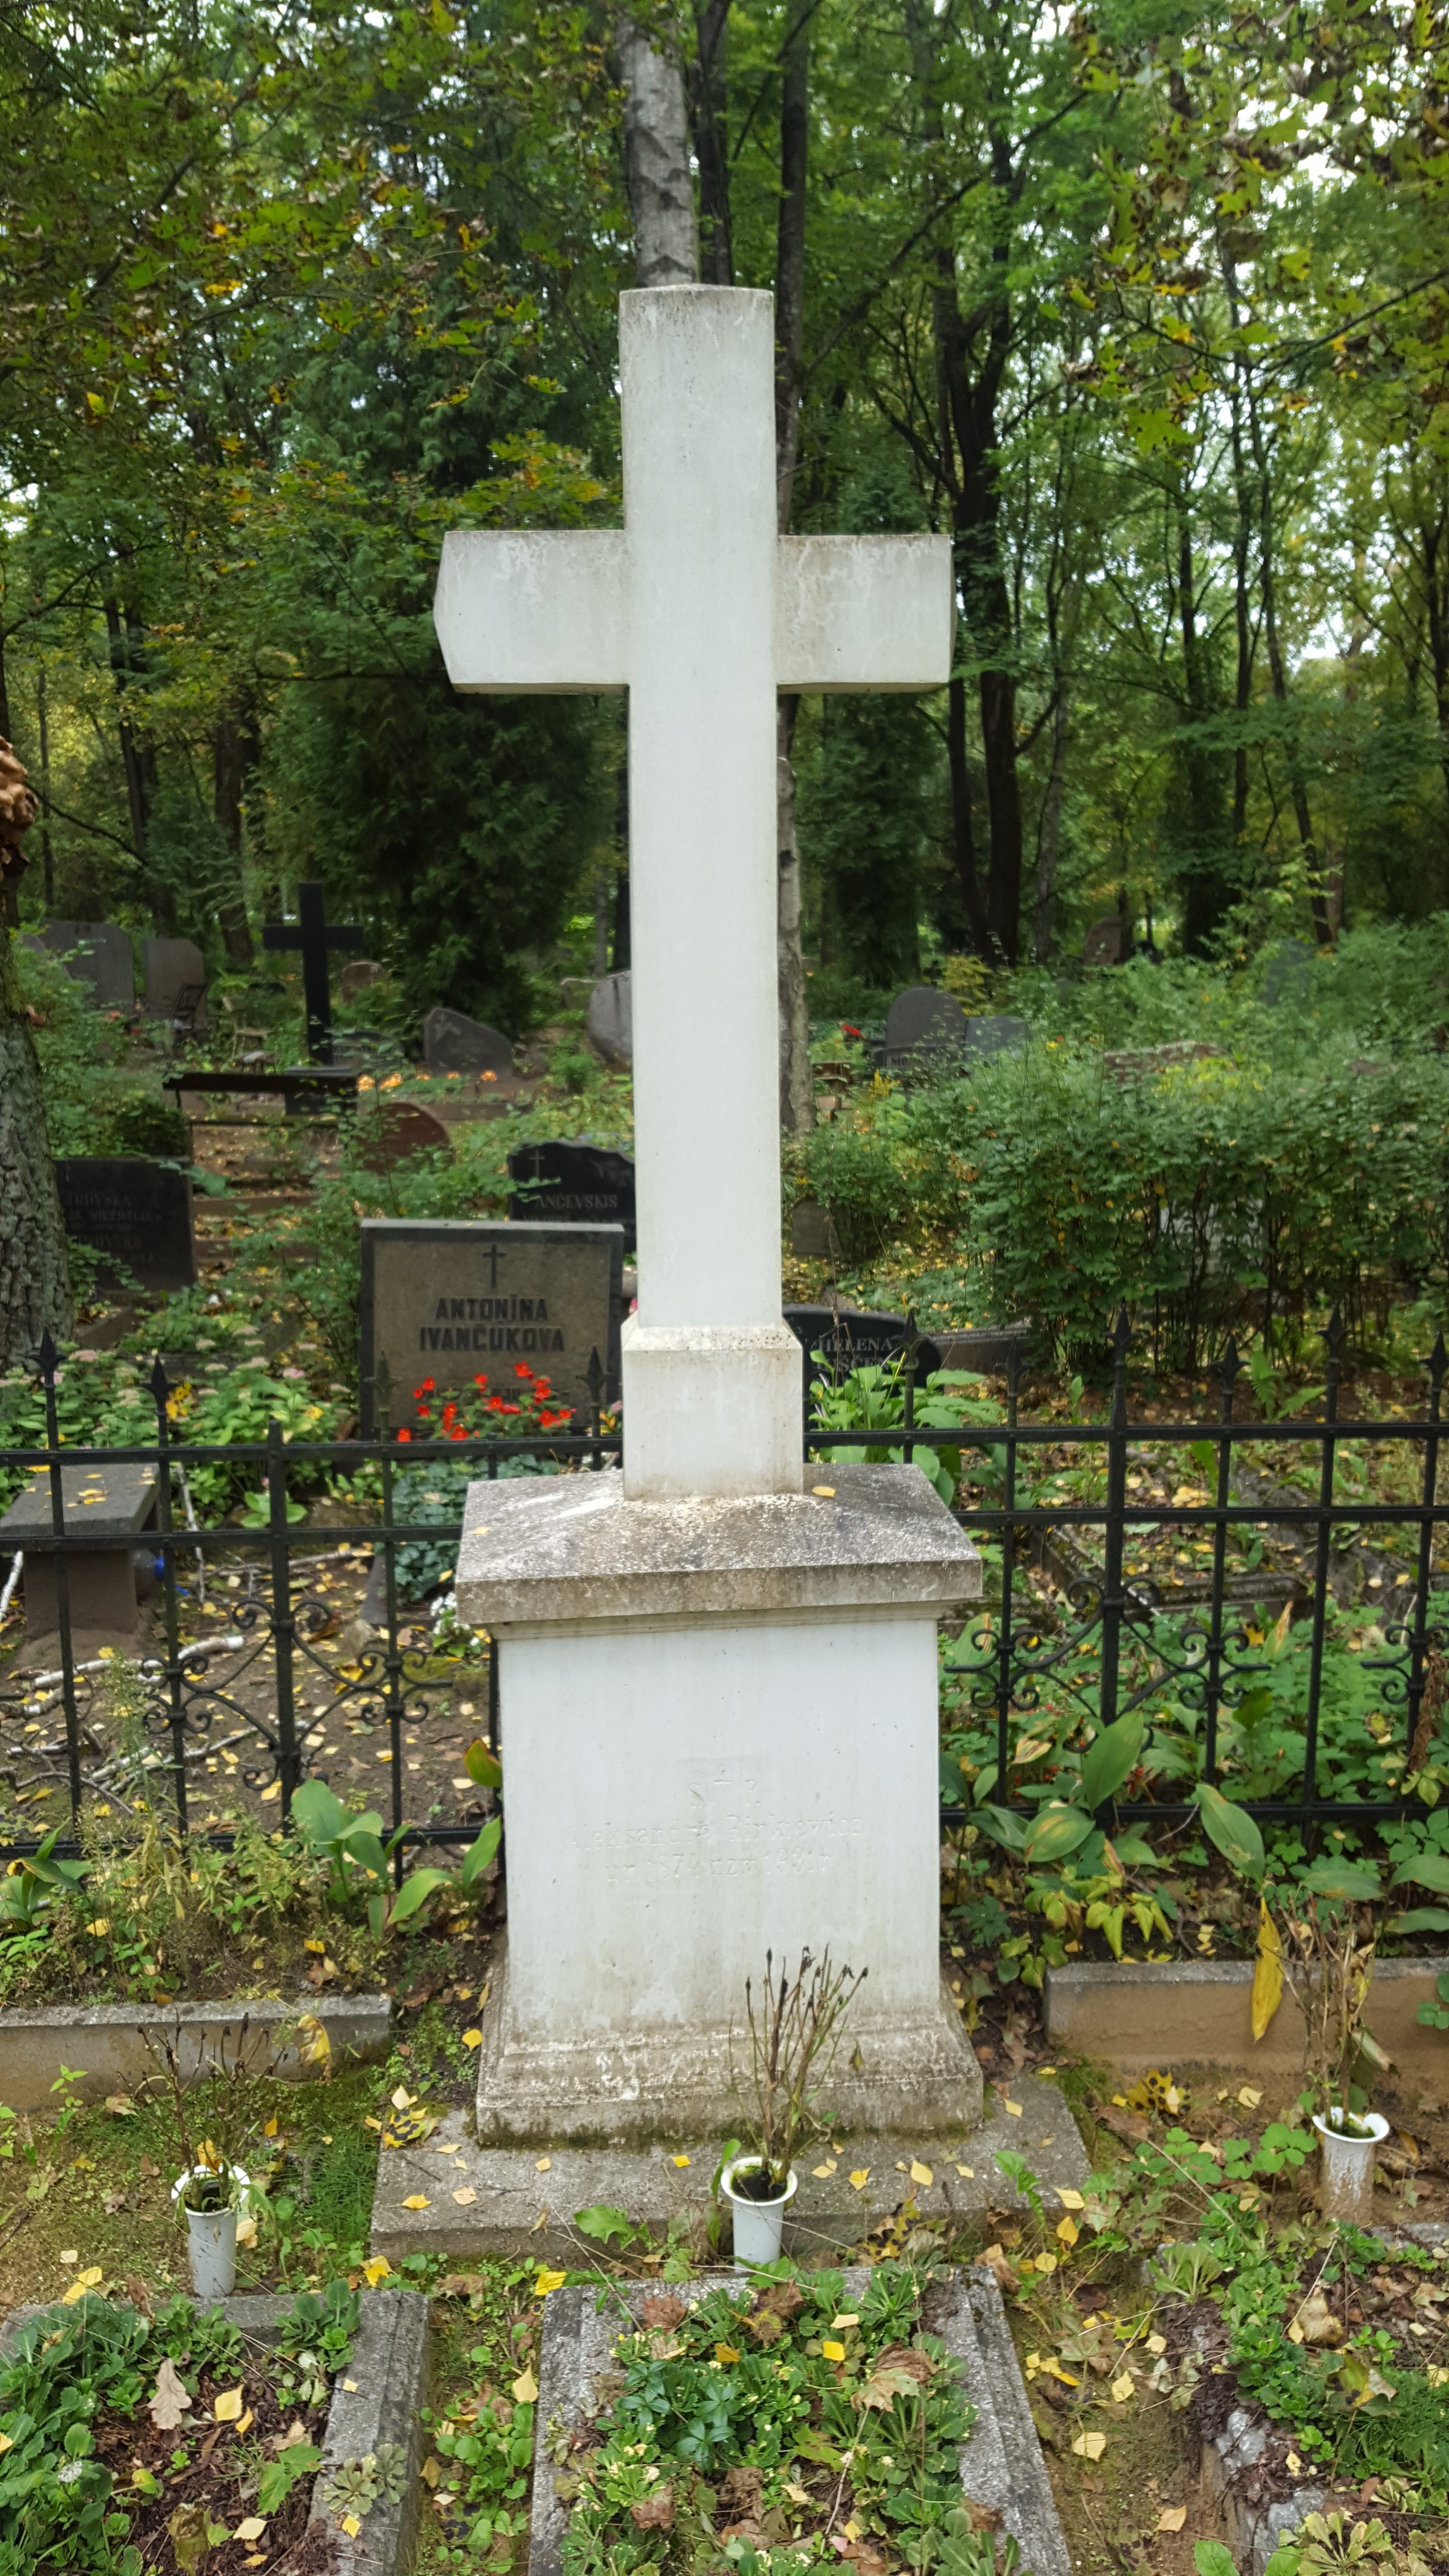 Tombstone of Alexandra Rinkievich, St Michael's cemetery in Riga, as of 2021.